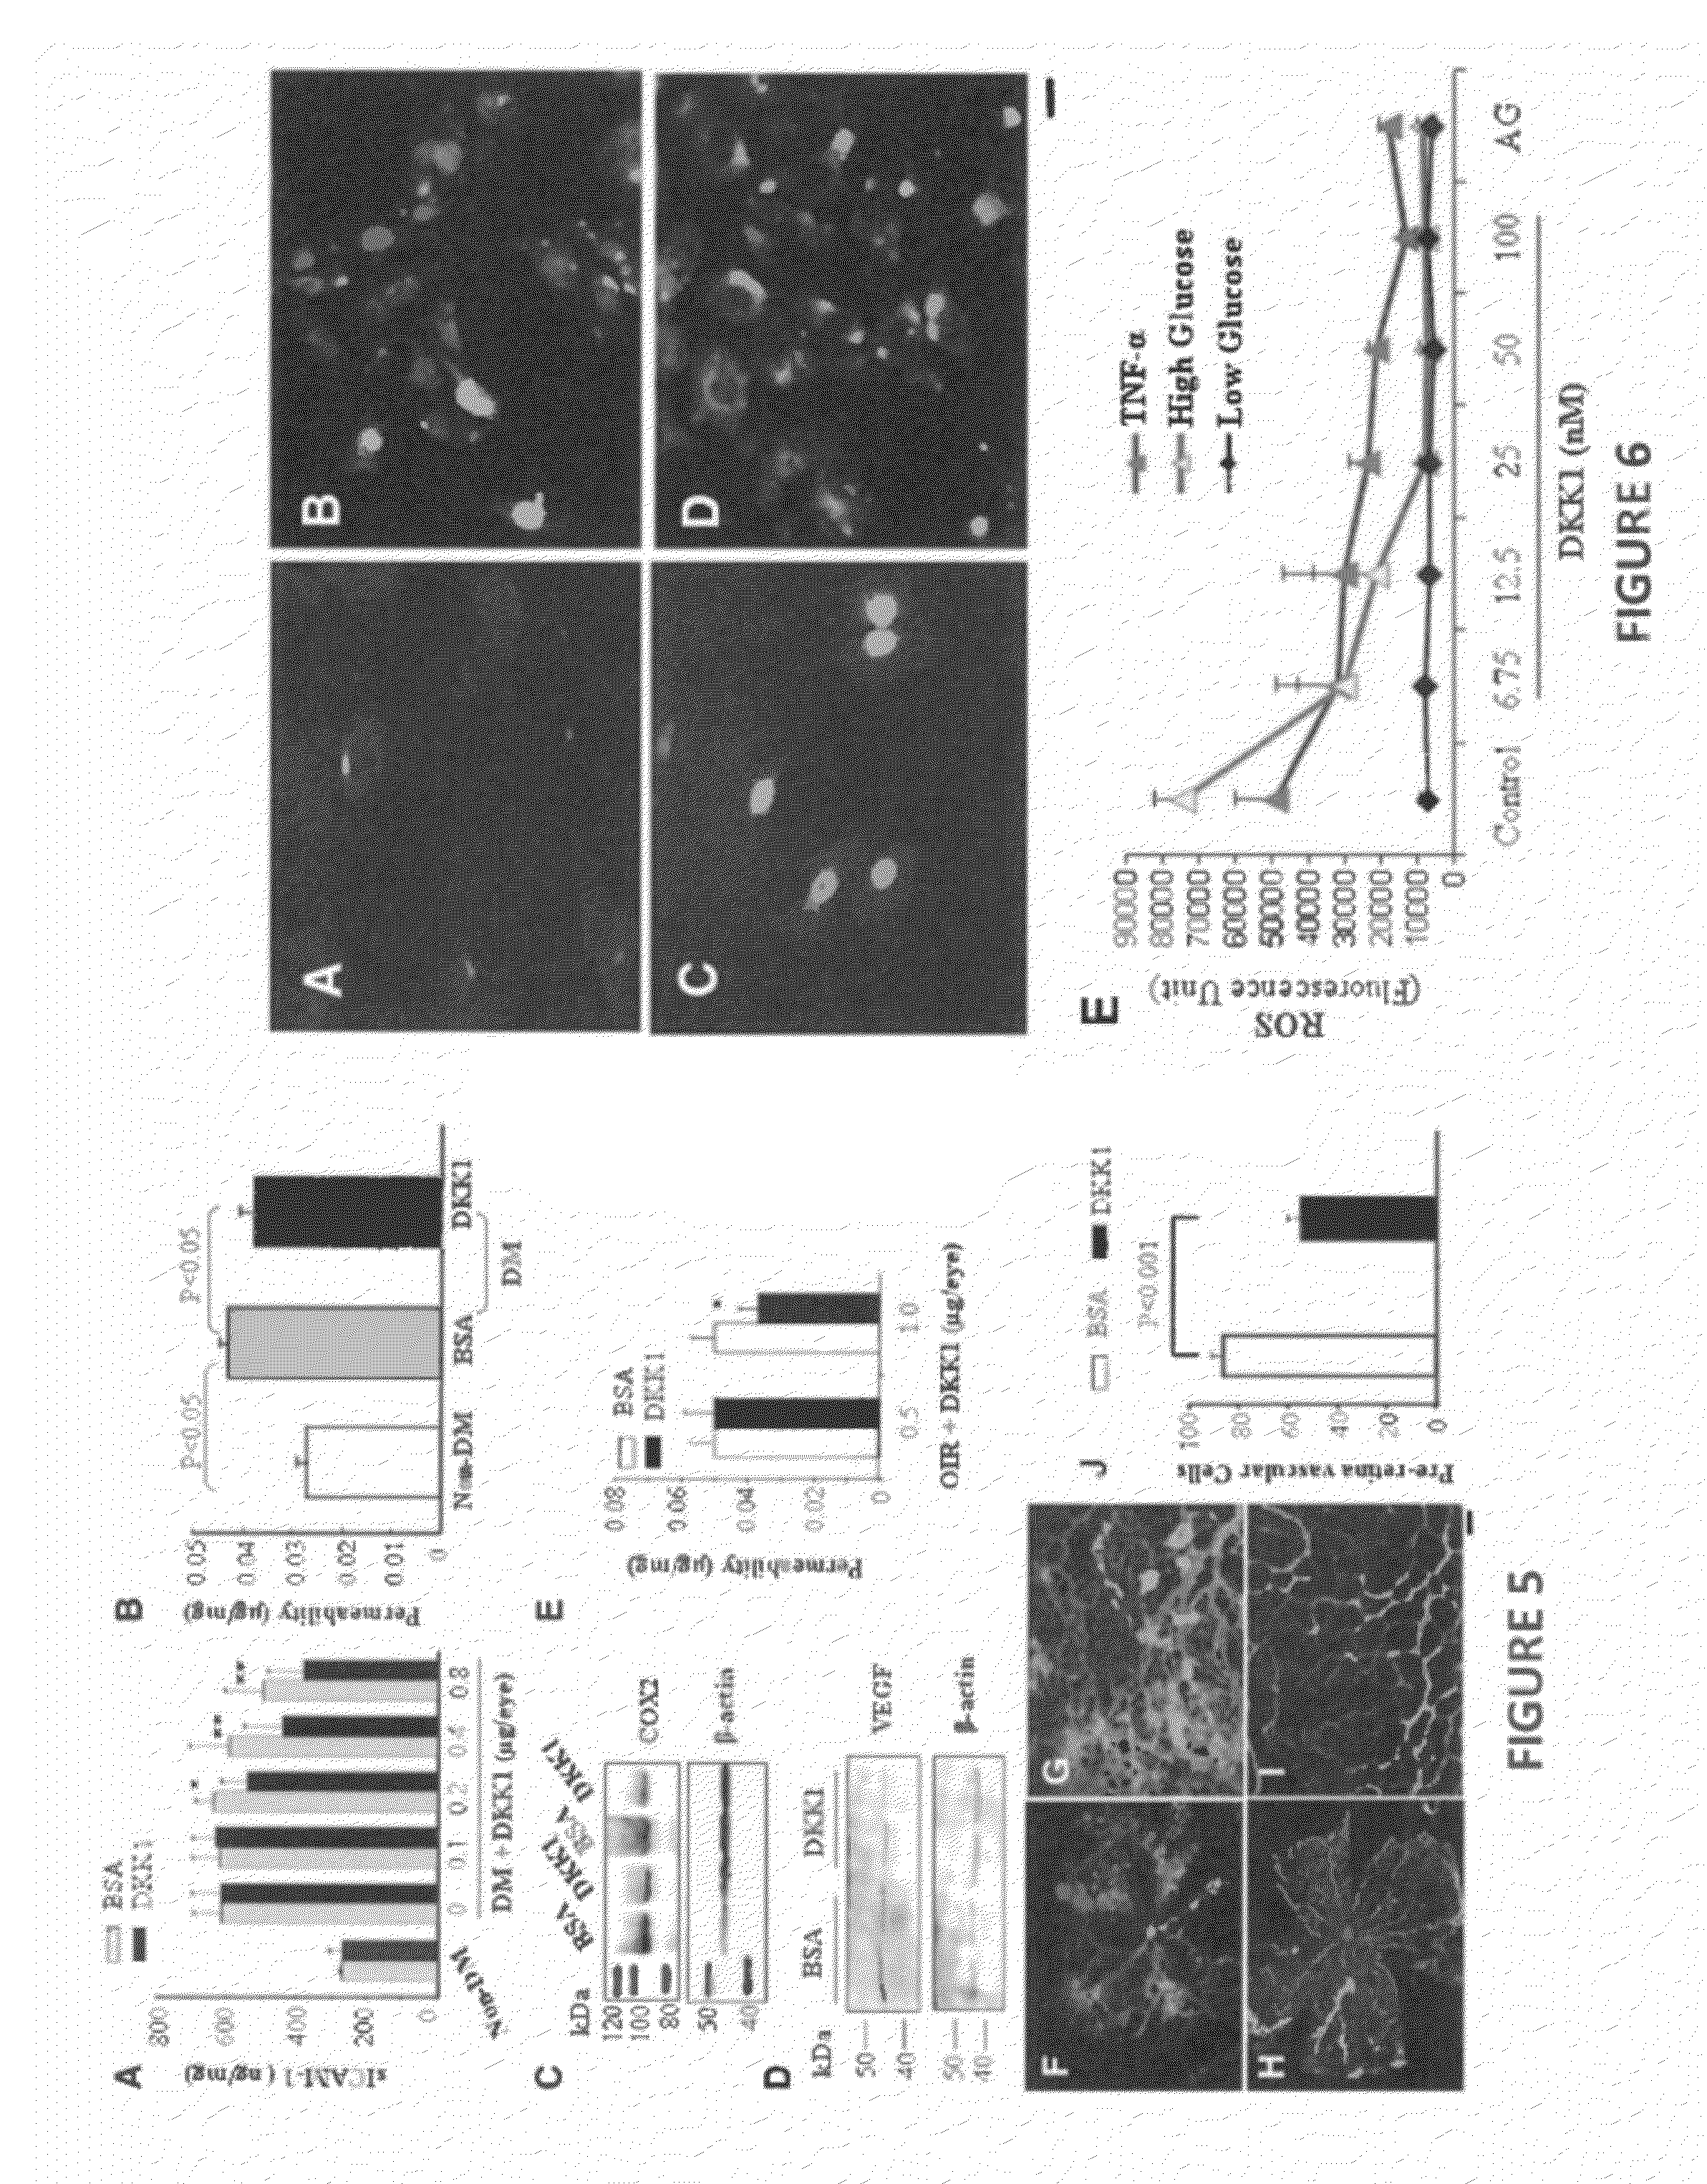 MONOCLONAL ANTIBODIES THAT INHIBIT THE Wnt SIGNALING PATHWAY AND METHODS OF PRODUCTION AND USE THEREOF